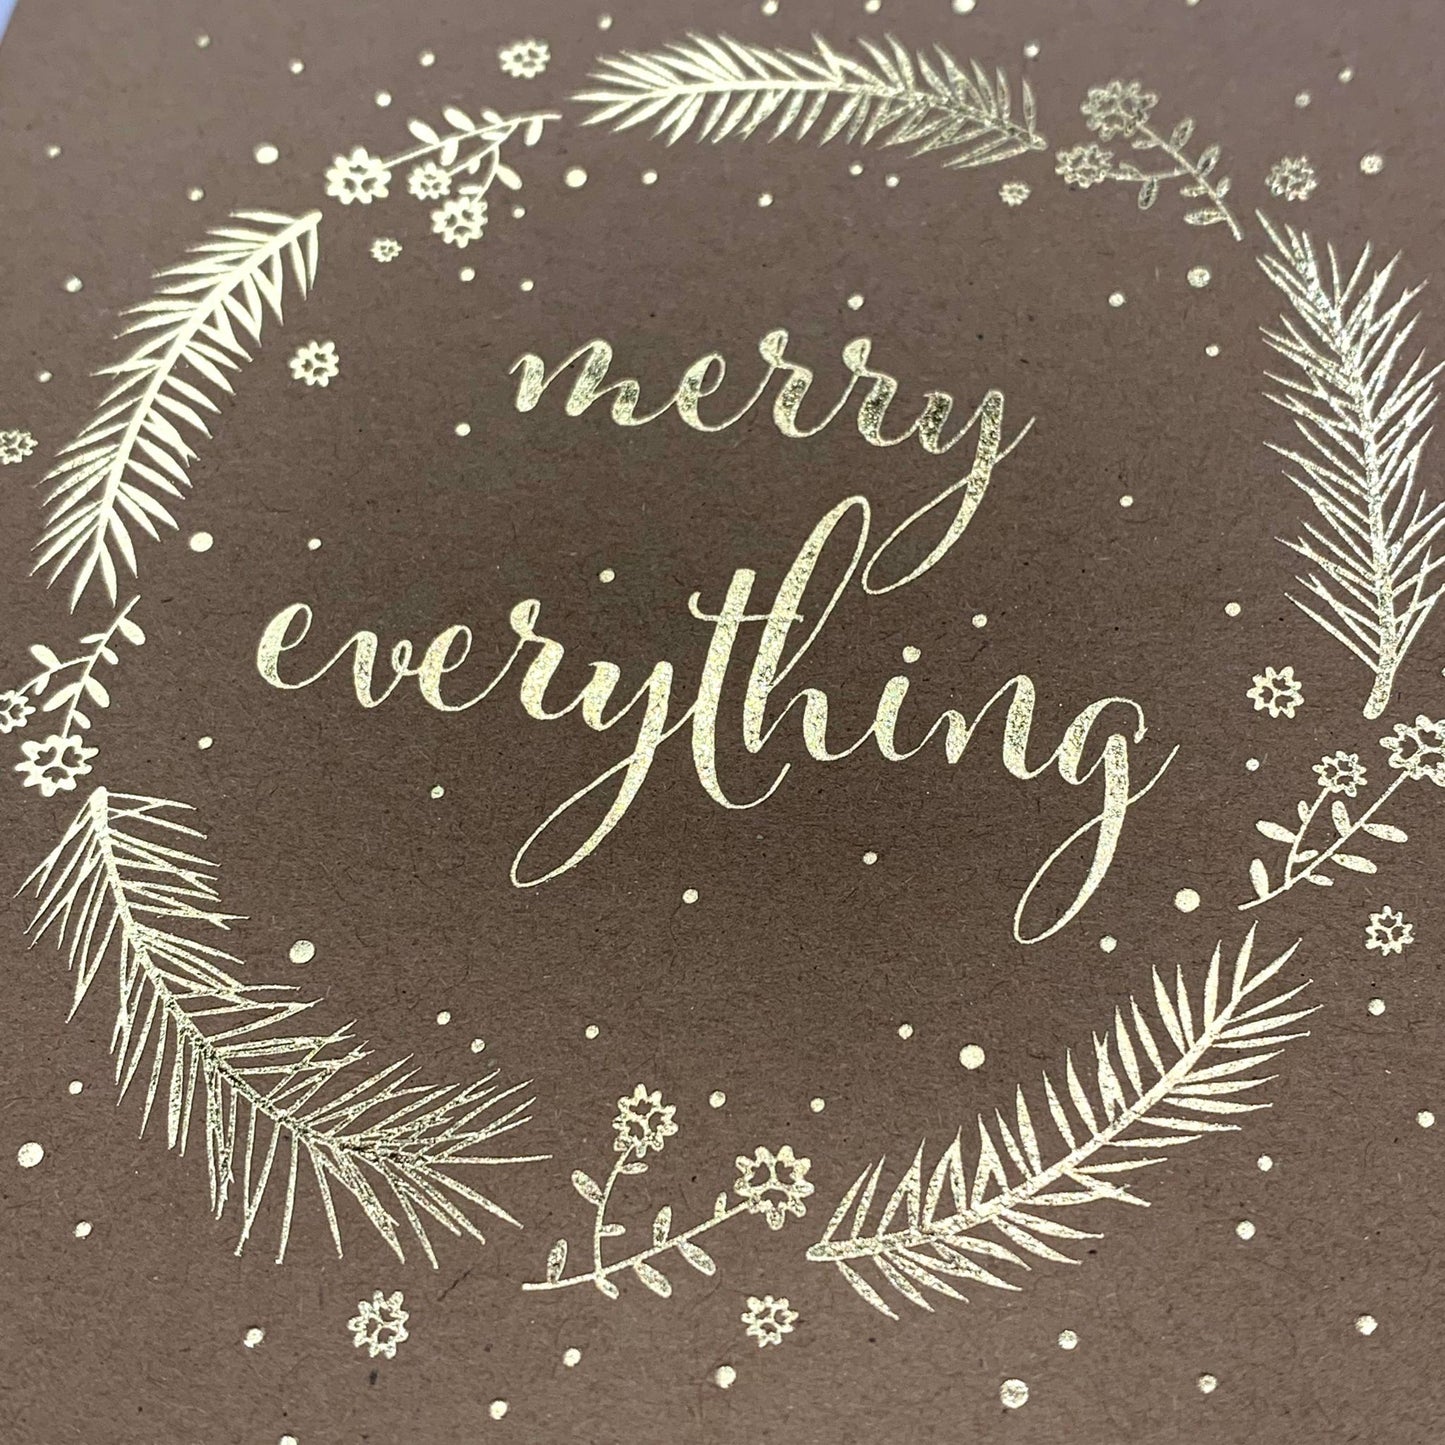 CANDLE BARK CREATIONS - "Merry Everything" Seasonal Wreath - SMALL SINGLE CARDS